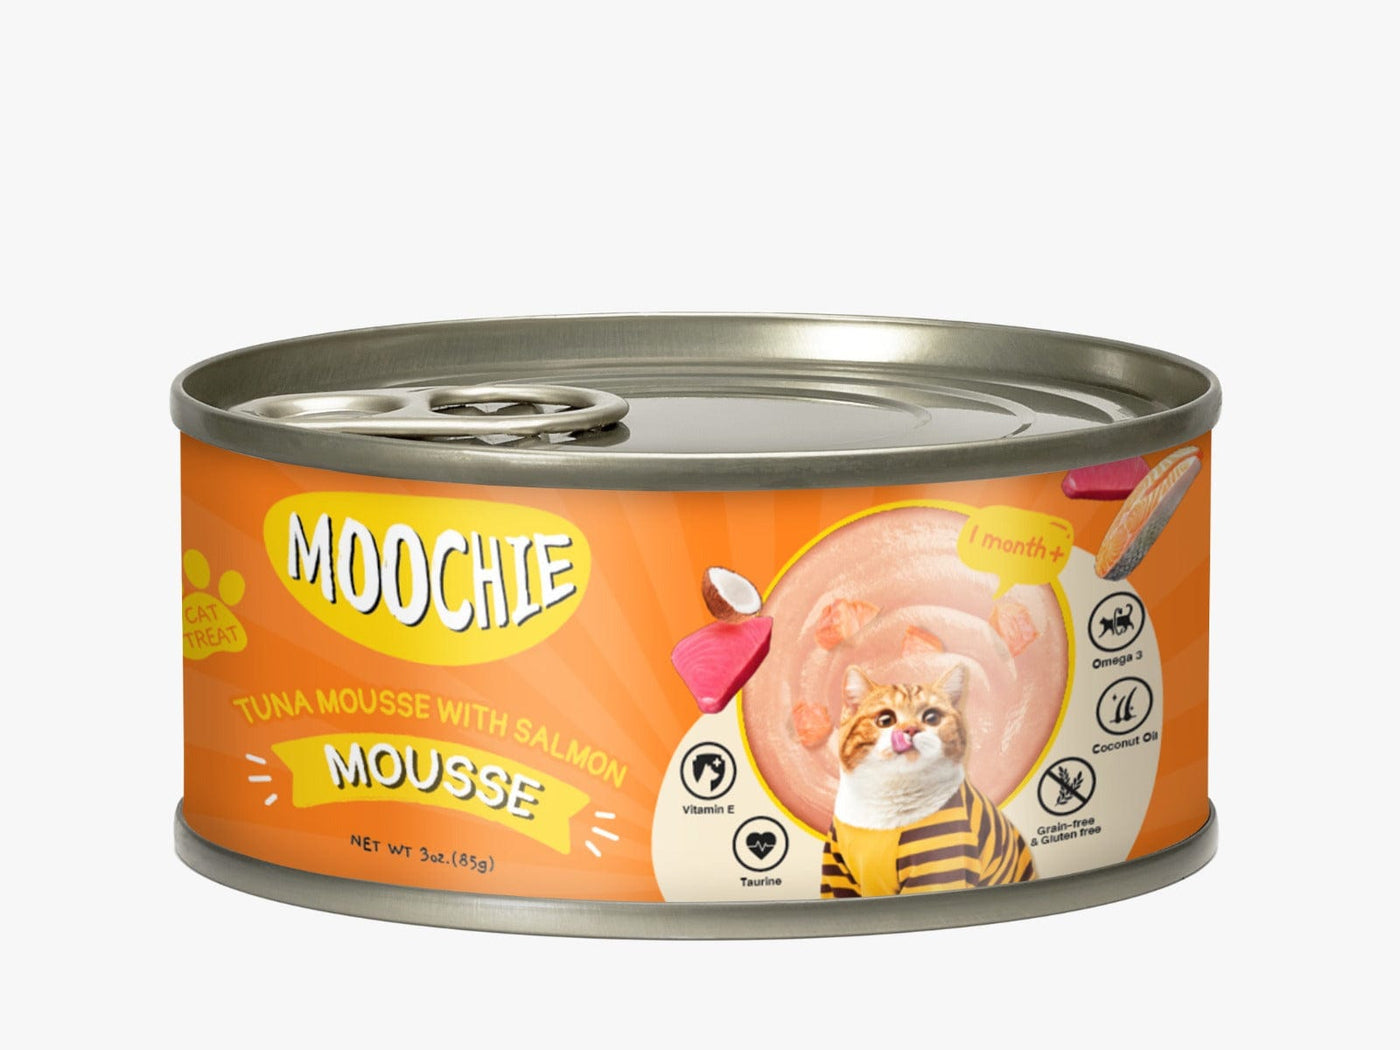 Moochie Tuna Mousse With Salmon Mousse 85G. Can